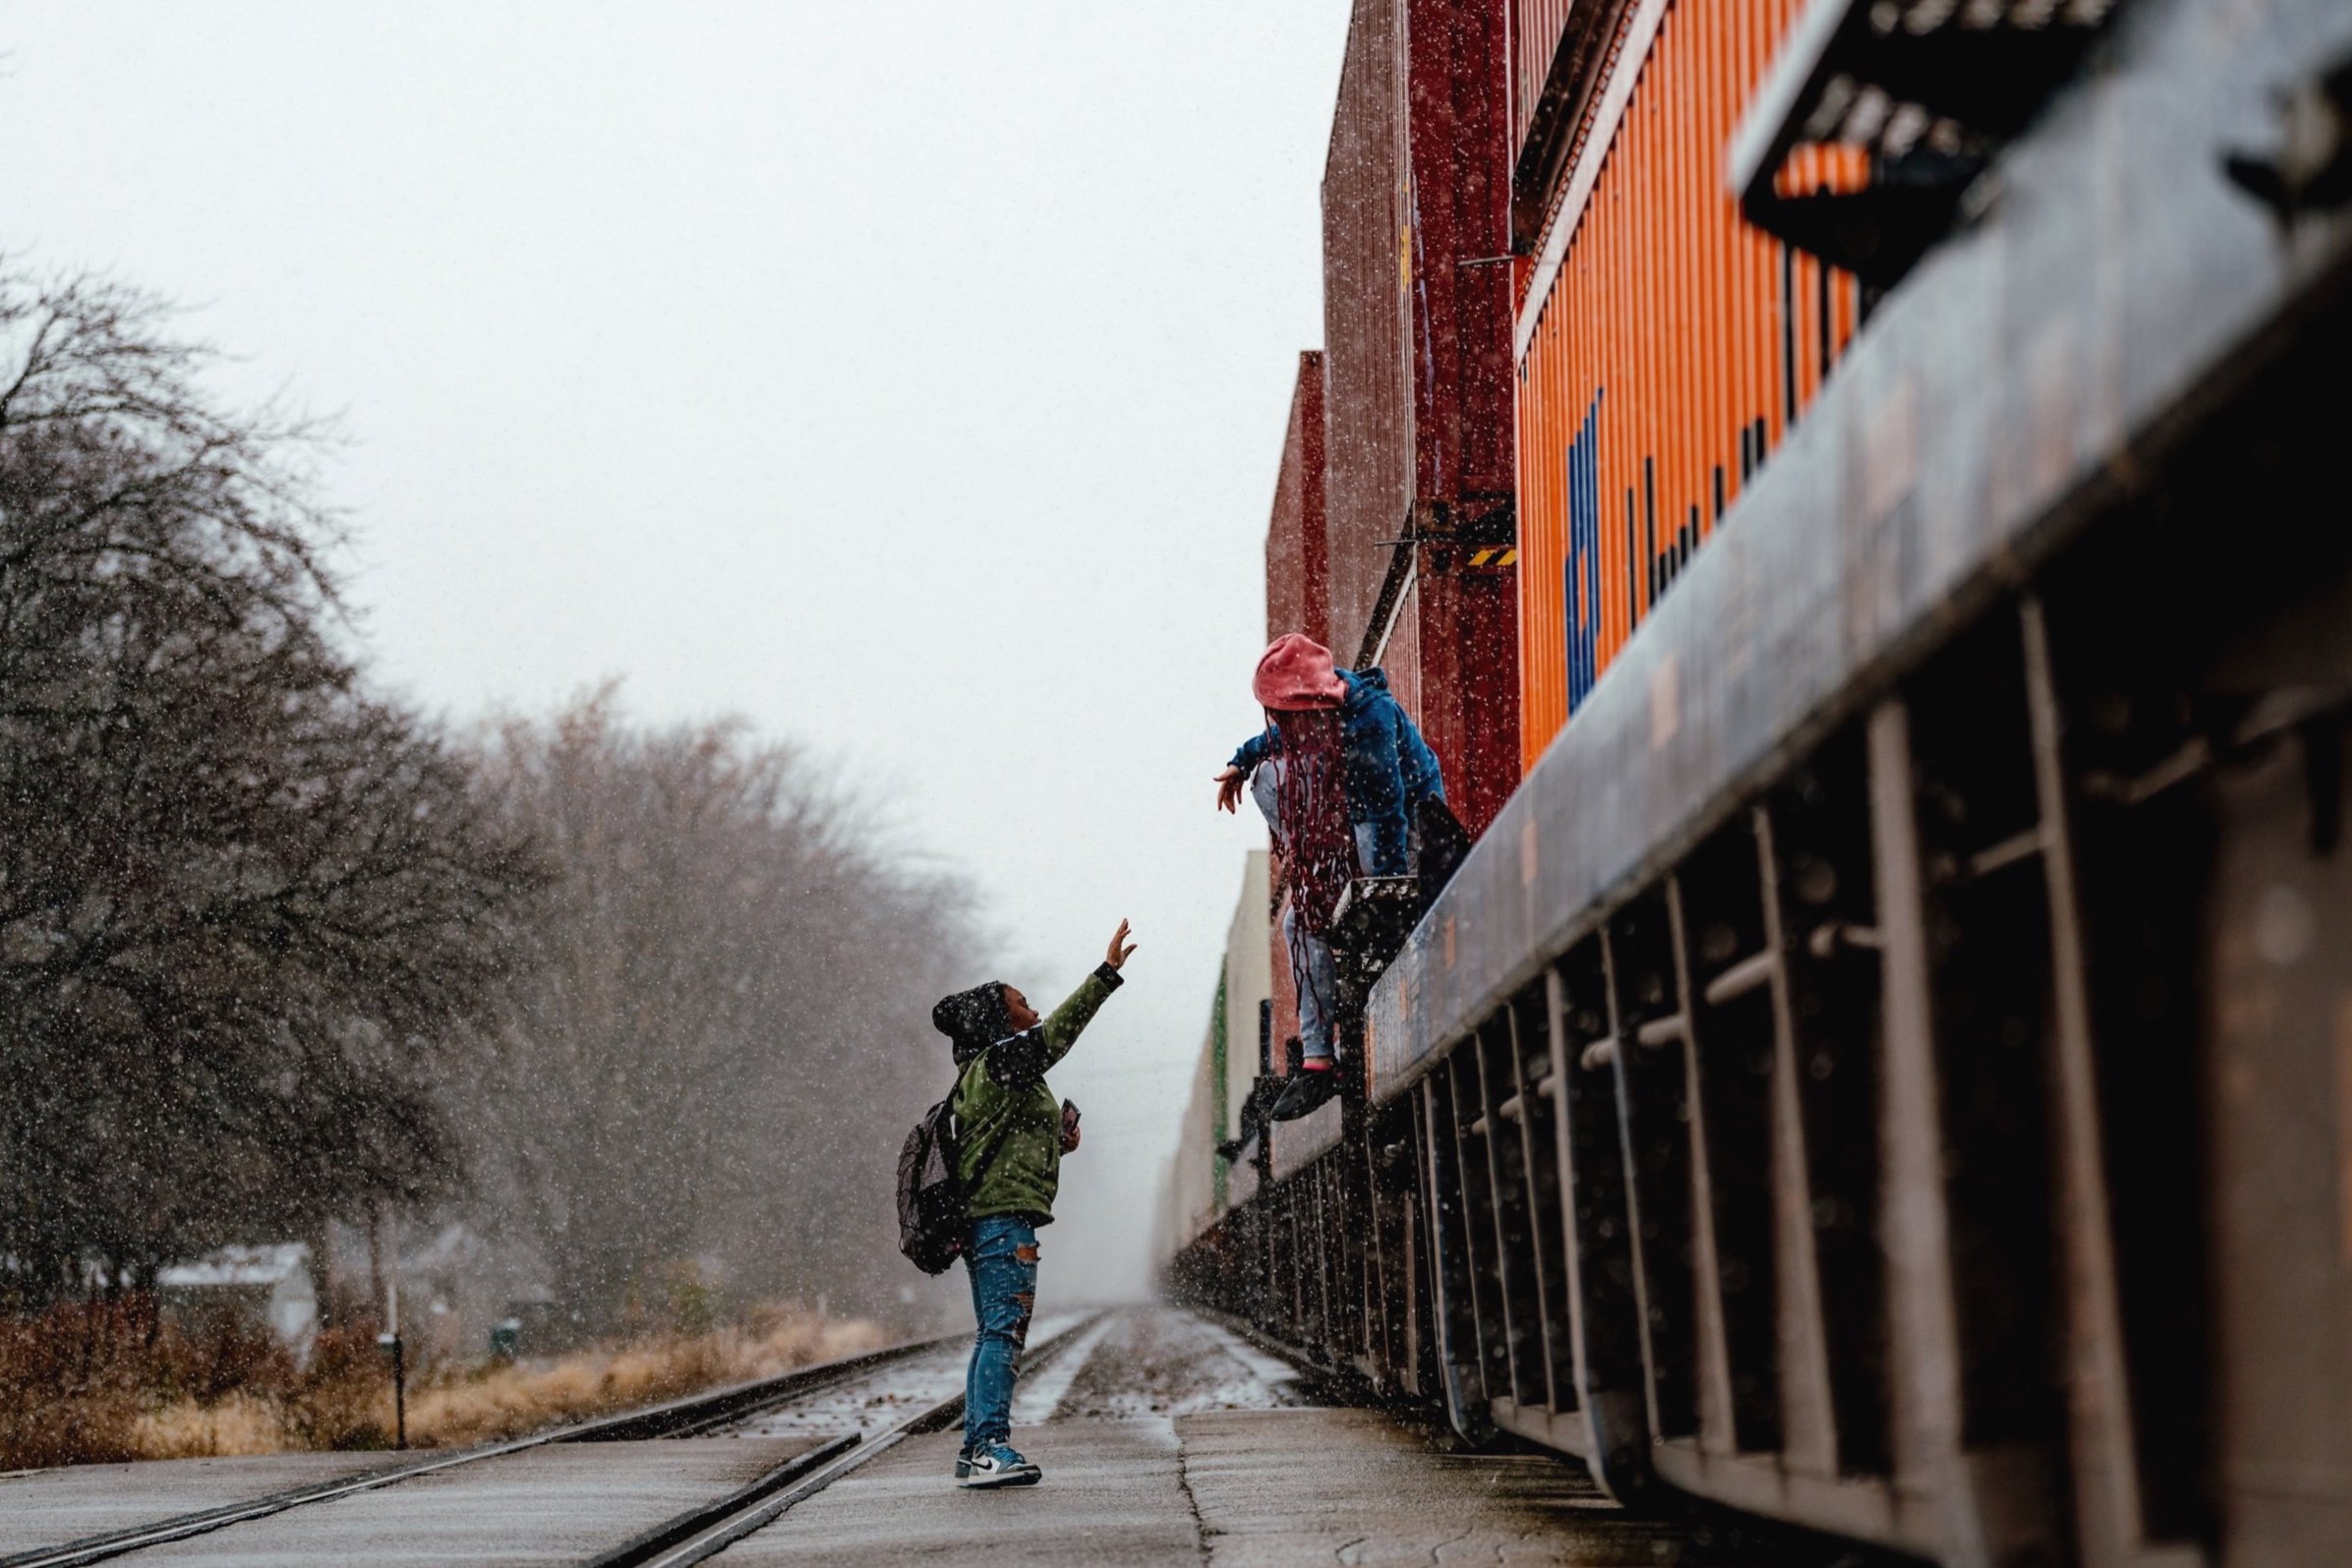  Blocked Crossings Force Kids to Crawl Under Trains   ProPublica, 2023   